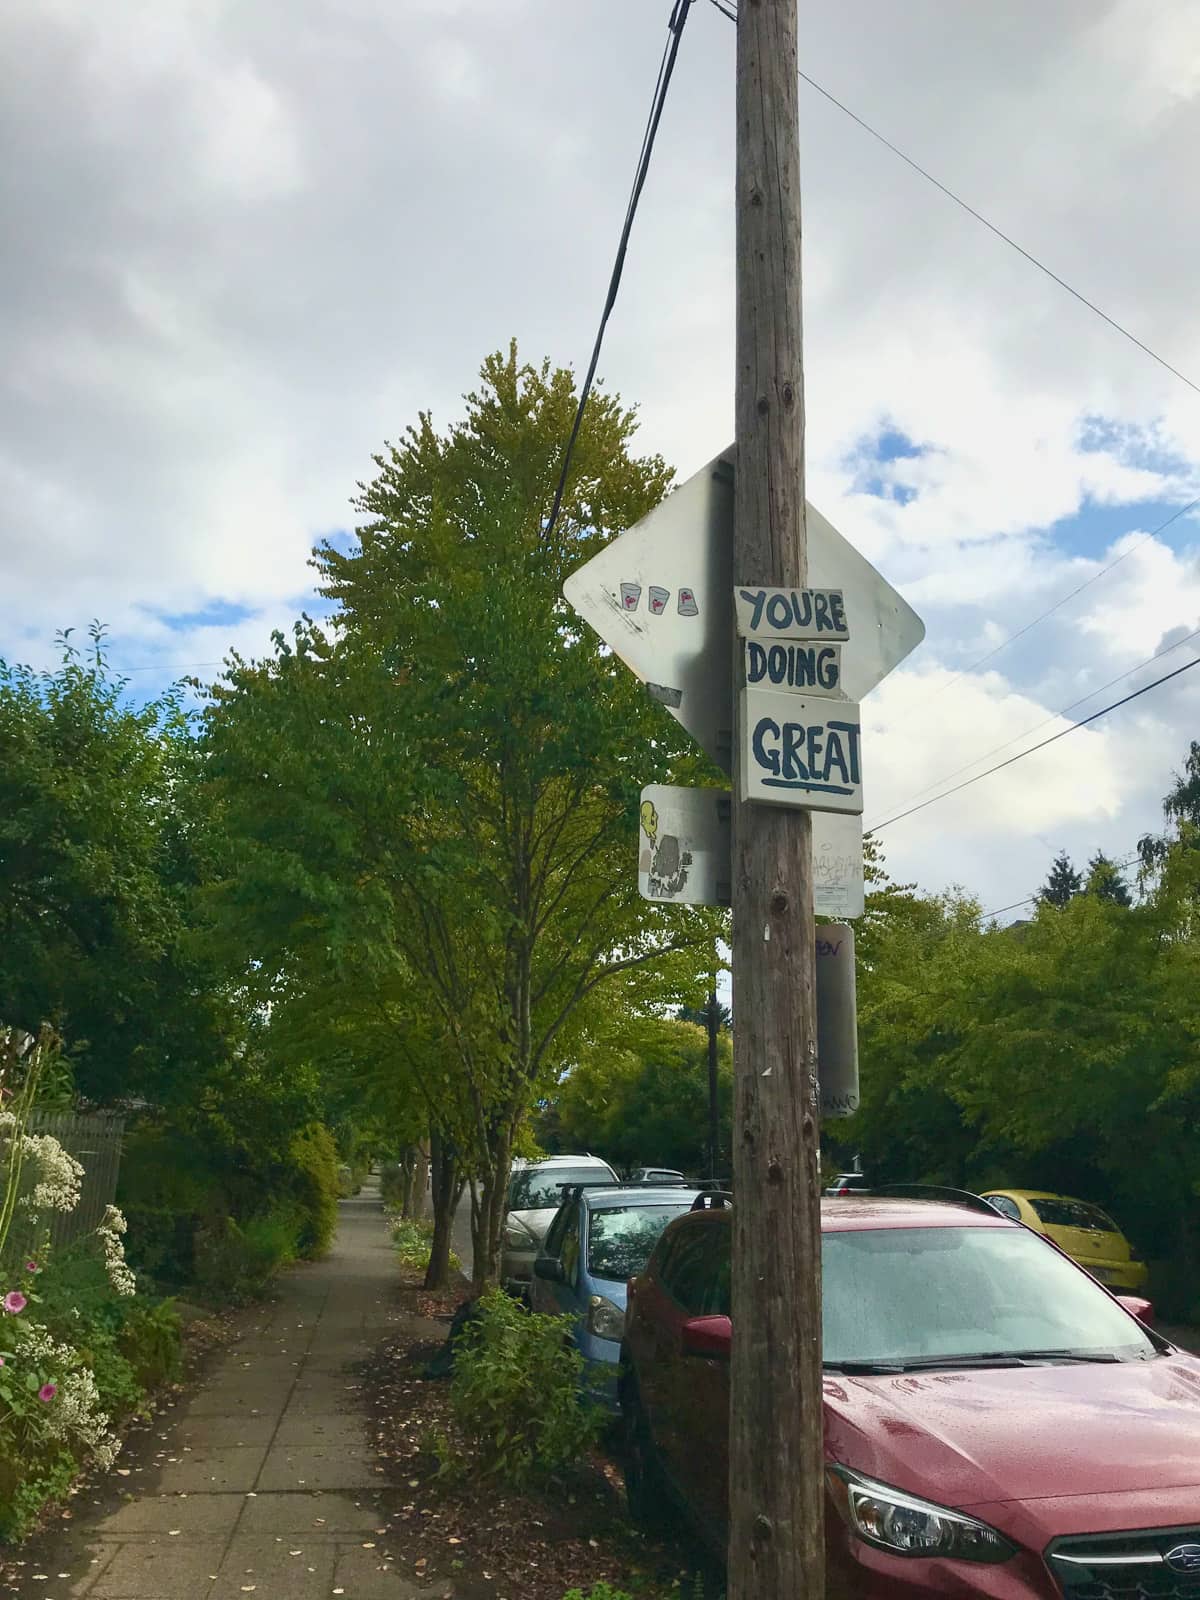 An handwritten sign on a telegraph pole in the middle of a suburban street, reading “You’re doing great”.